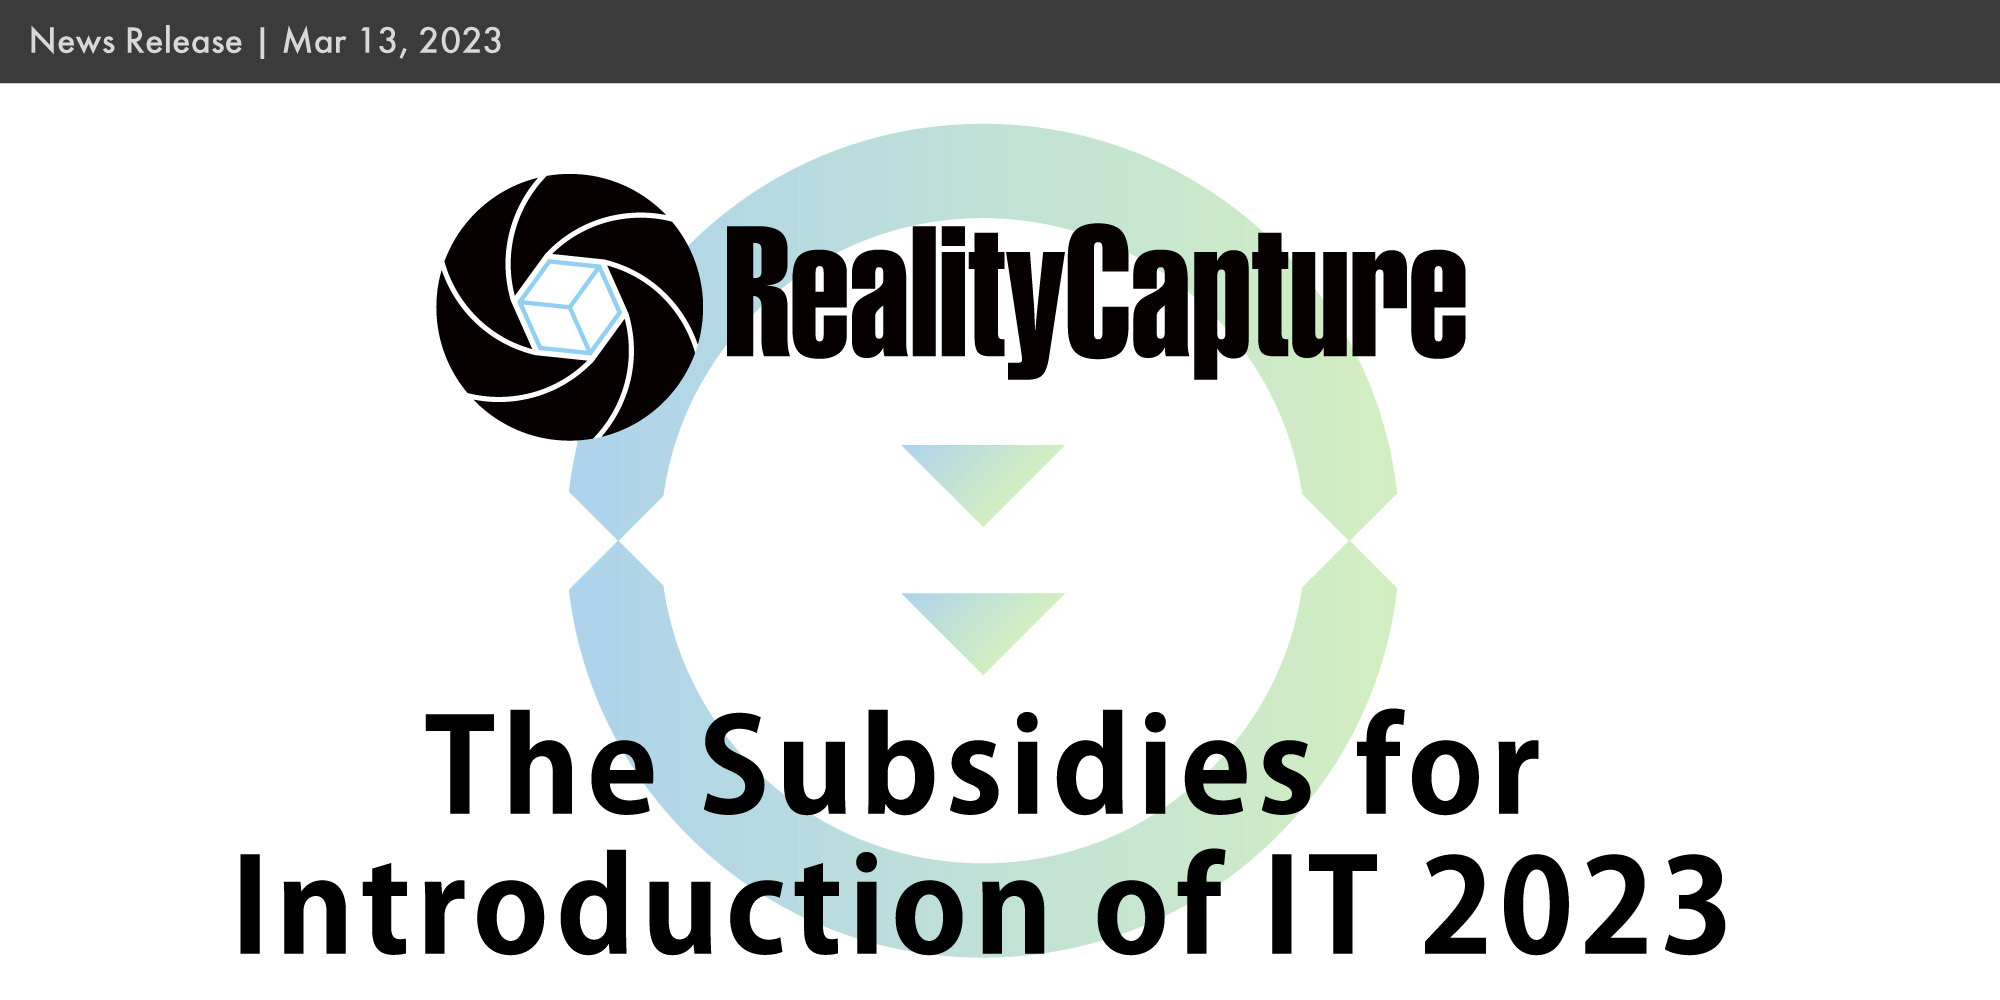 In fiscal year 2023, StockGraphy has once again been selected as an IT implementation support provider. RealityCapture, along with introductory training & demo, can continue to be acquired through the IT implementation subsidy program.